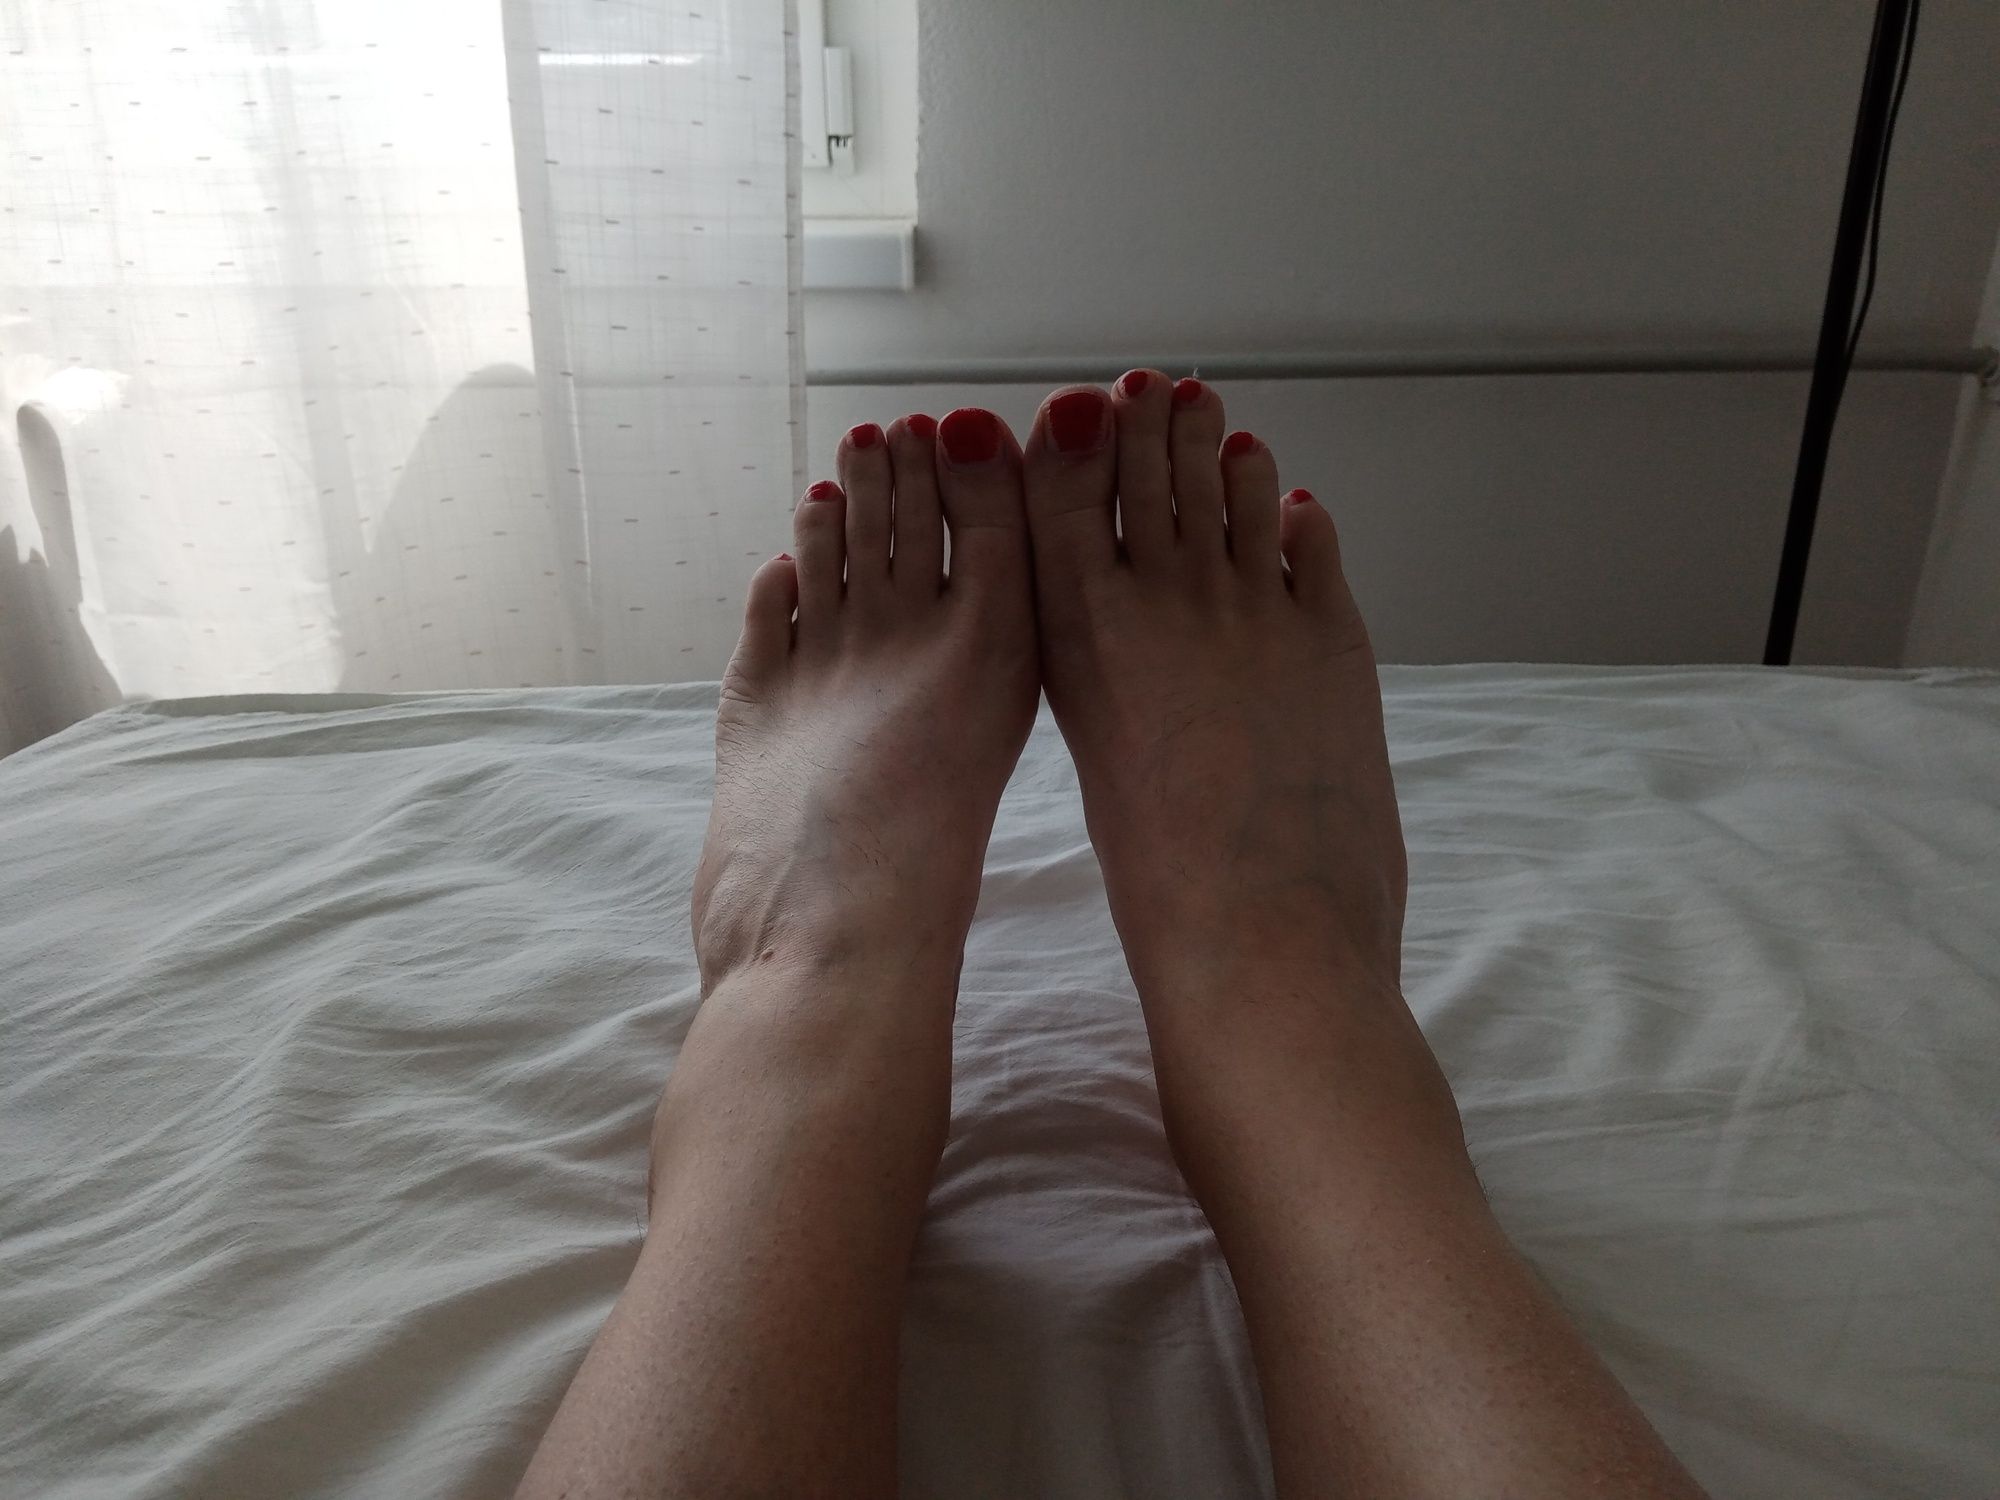 MILF tranny shows off her feet with red painted toes #5